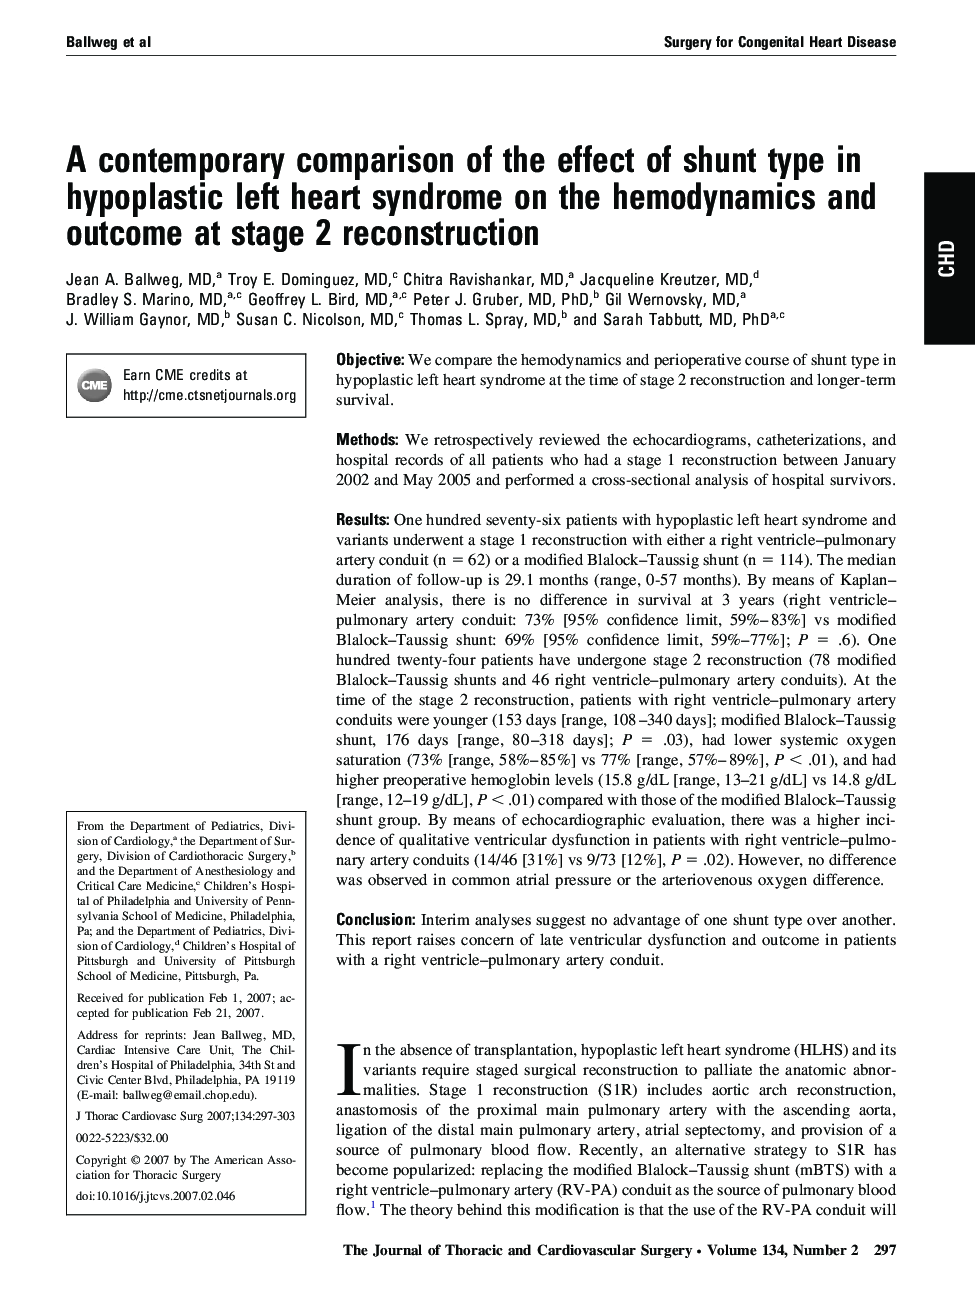 A contemporary comparison of the effect of shunt type in hypoplastic left heart syndrome on the hemodynamics and outcome at stage 2 reconstruction